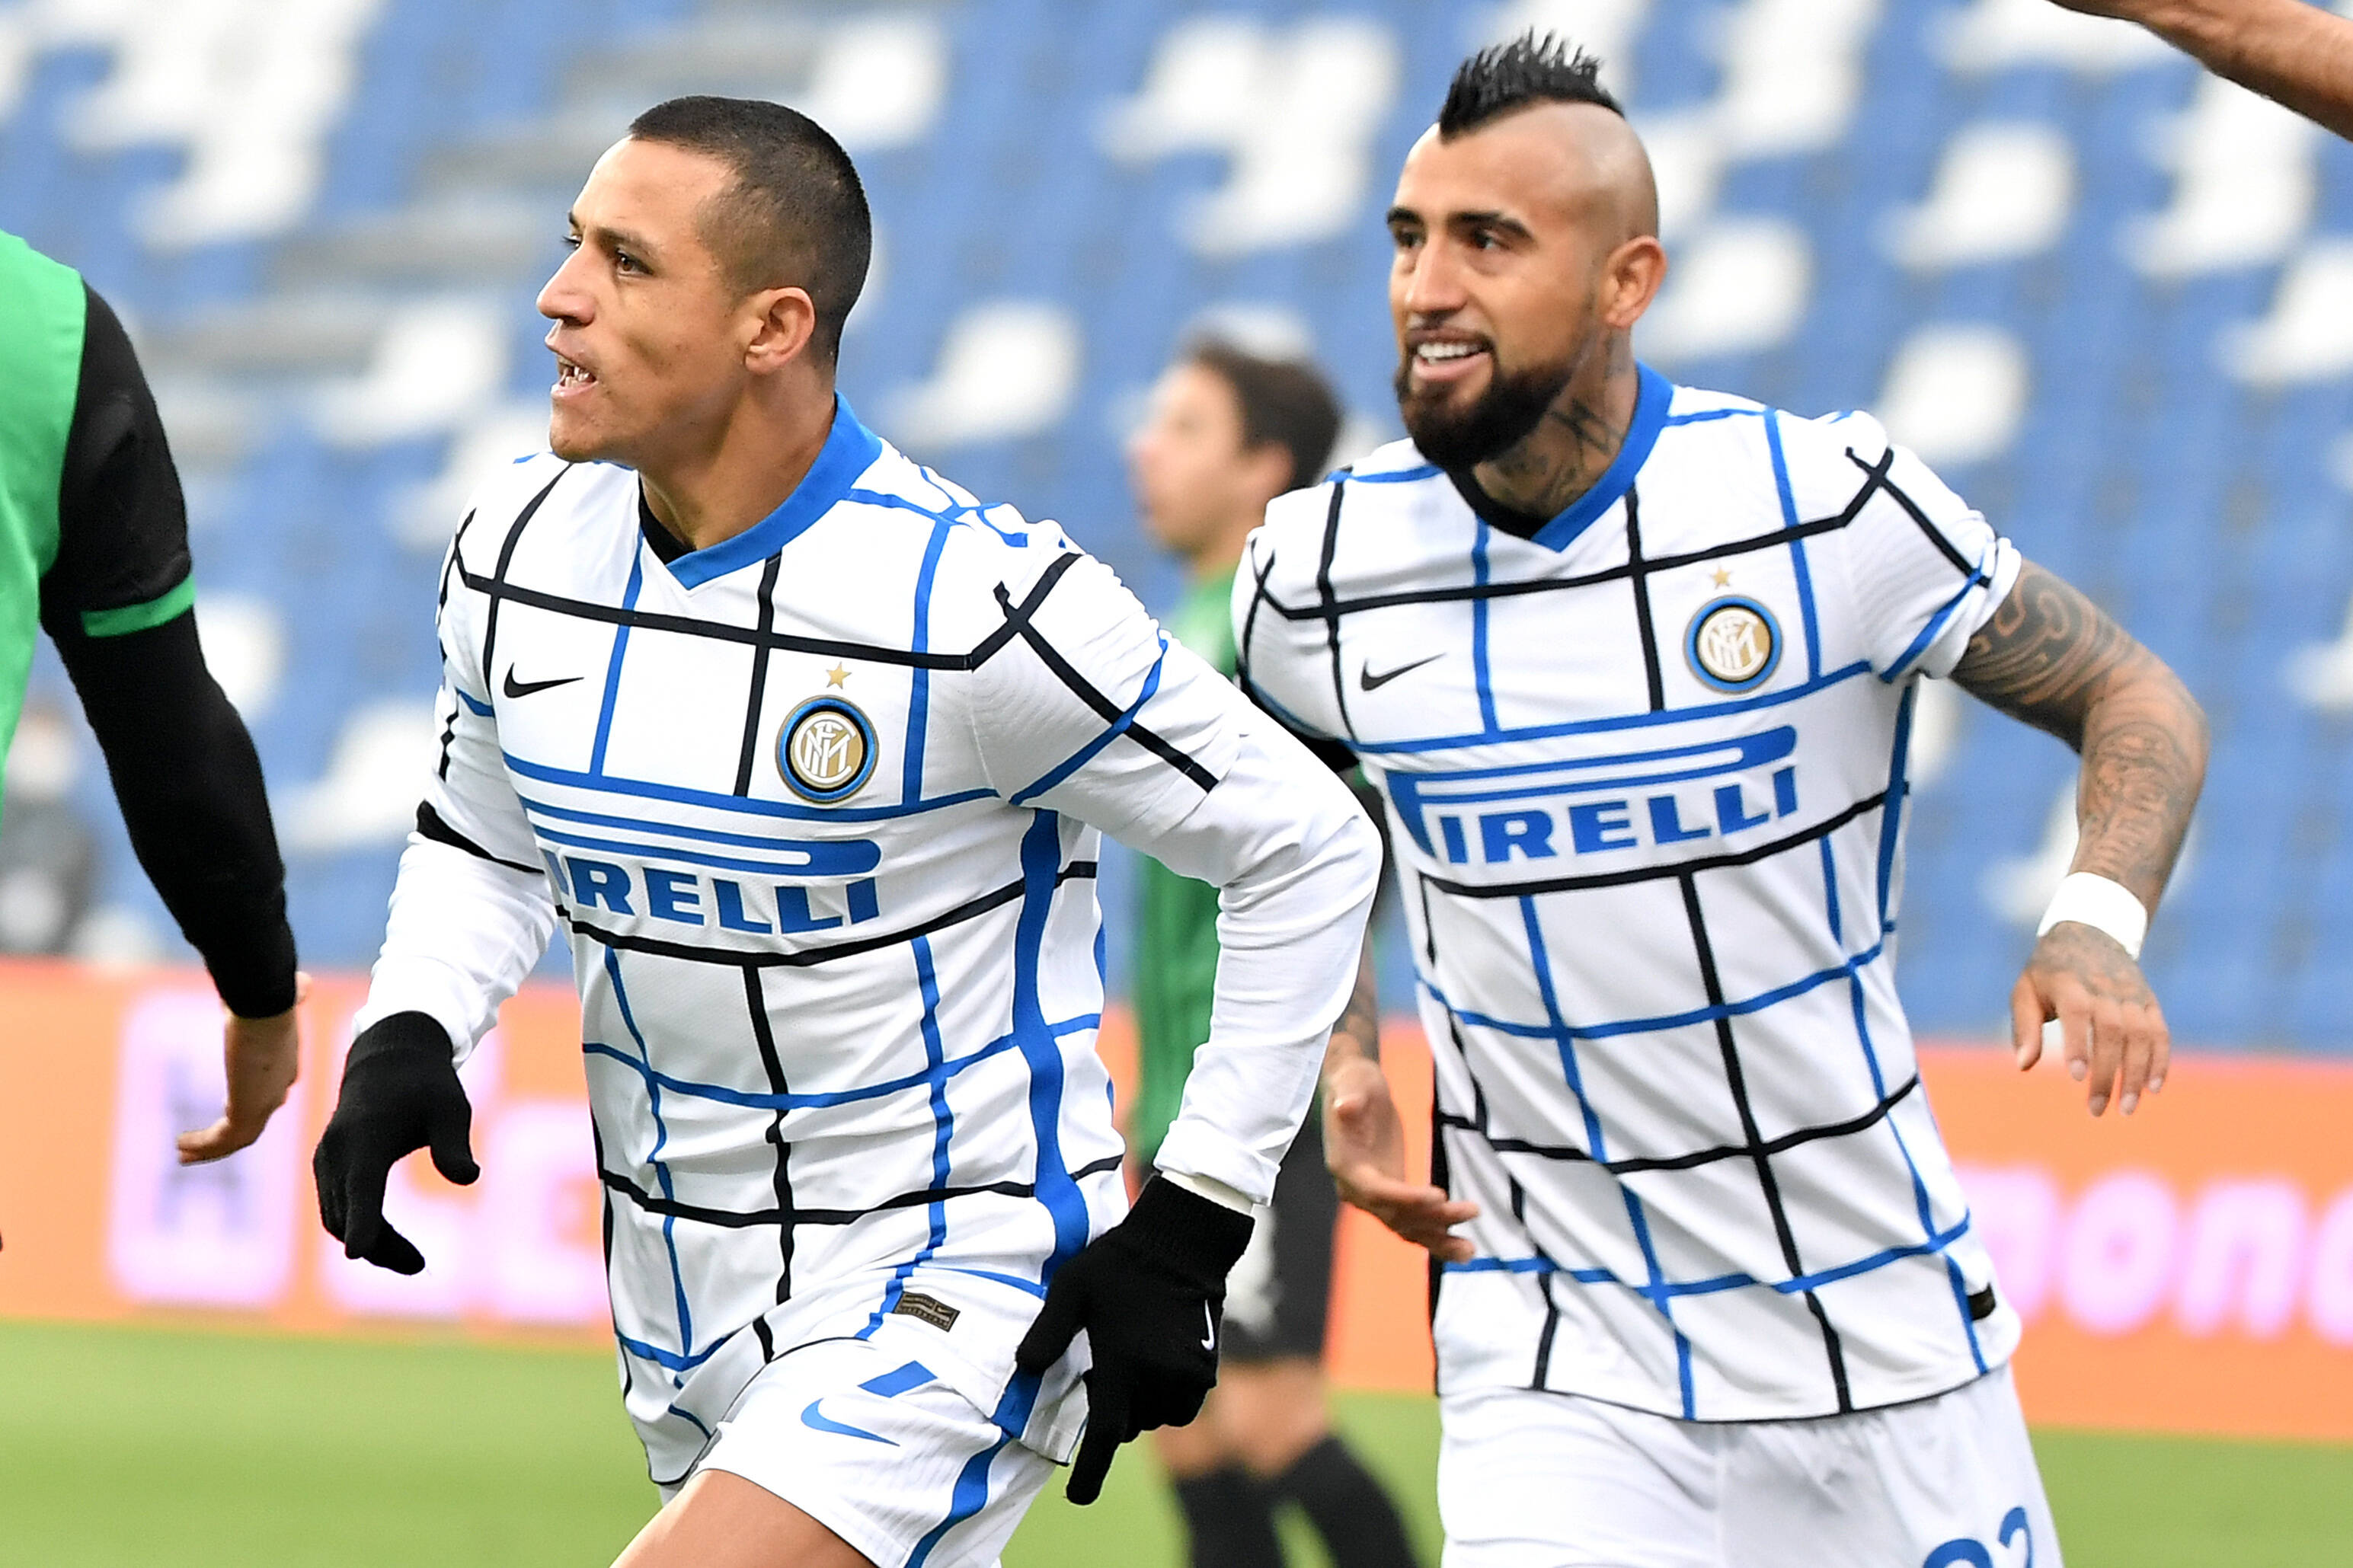 Alexis Sanchez Of Fc Internazionale Celebrates With Arturo Vidal After Scoring The Goal Of 1 0 During The Serie A Footba